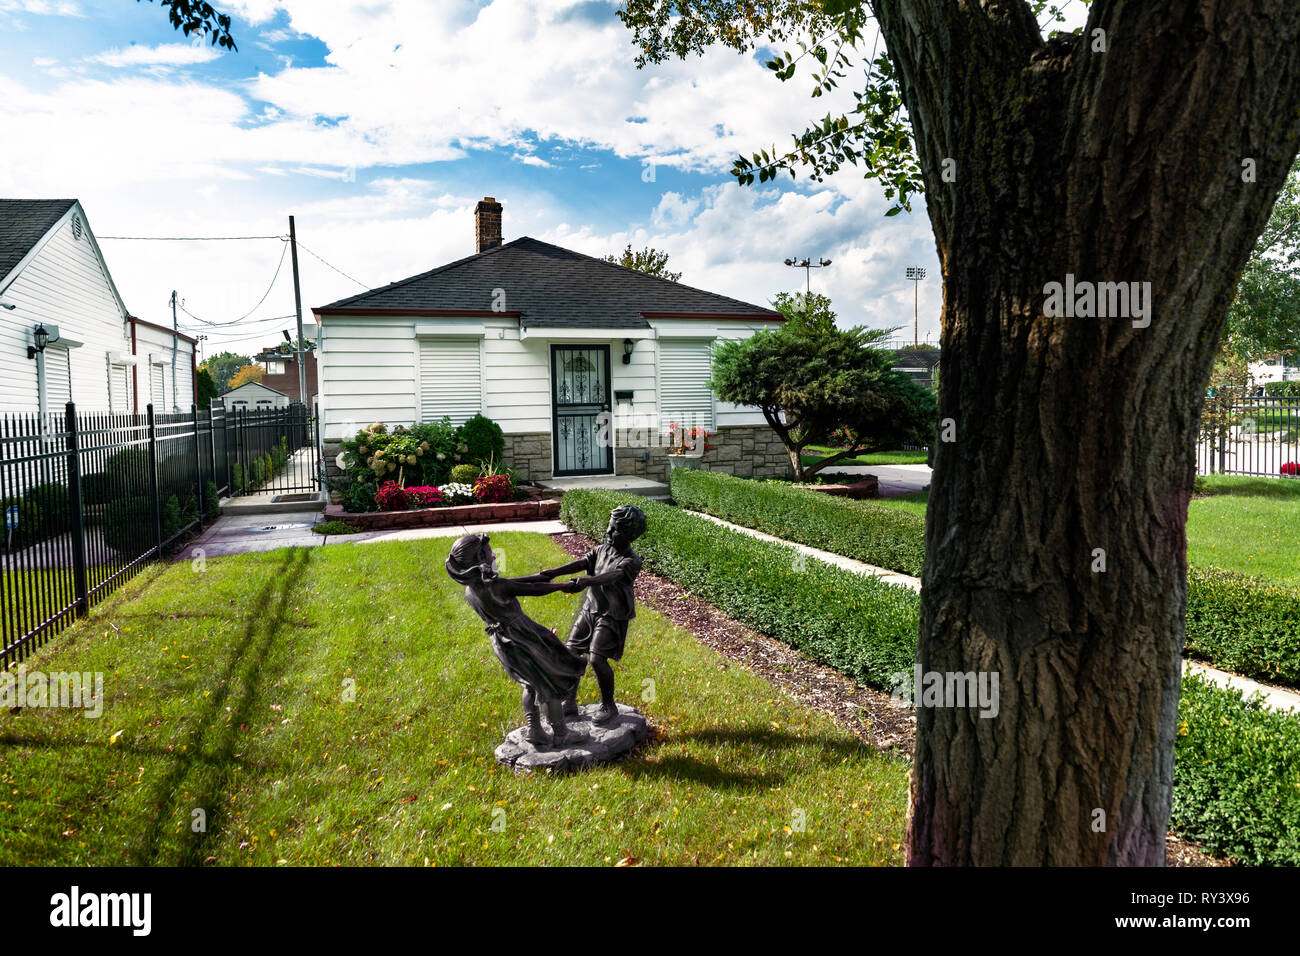 GARY, INDIANA - October 08, 2018: Exterior view of childhood home of pop star Michael Jackson in his hometown of Gary Indiana Stock Photo